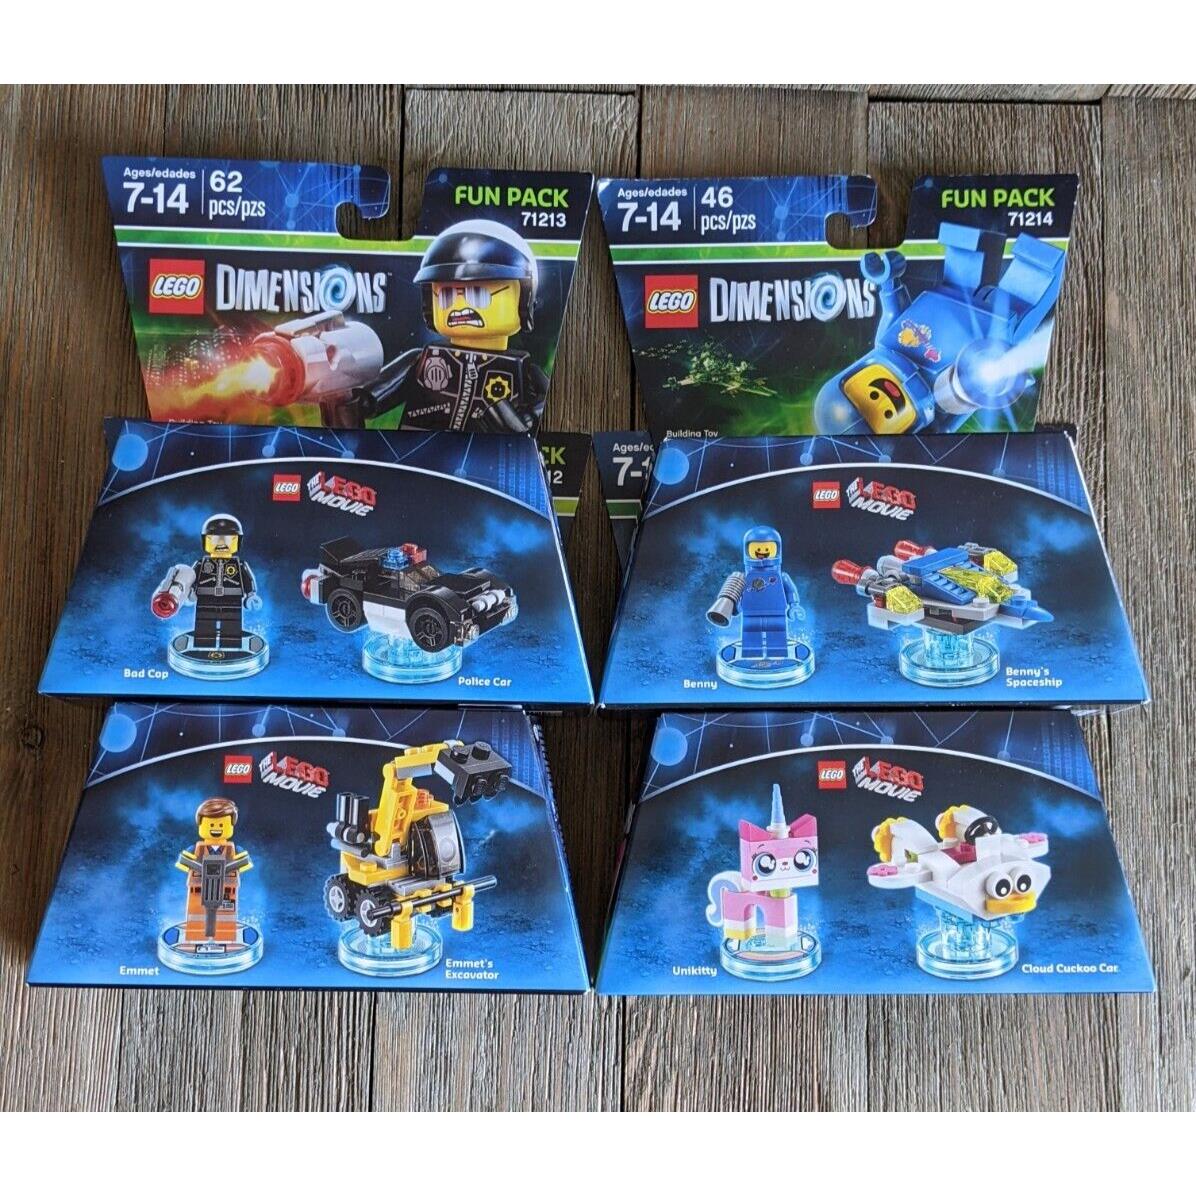 Lego Dimensions The Lego Movie Fun Pack Set 71231 71212 71213 71214